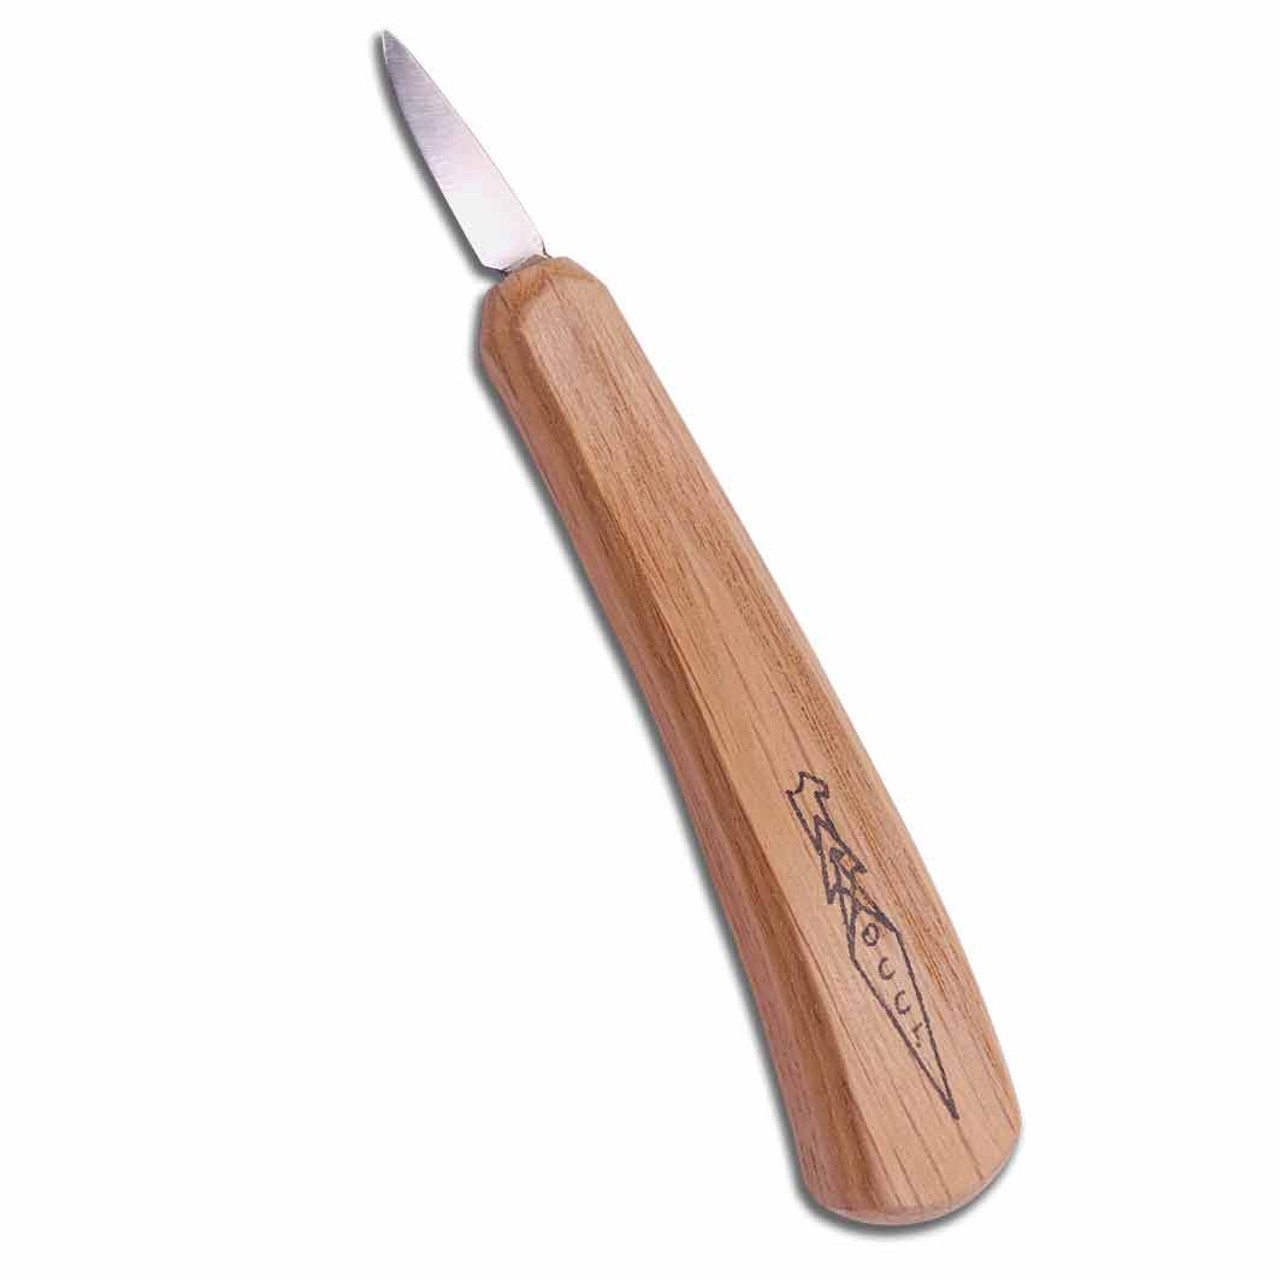 Looking at the OCC New Generation 1 3/8" Upsweep knife in an upright position showing the entire carving knife with the blade, oak handle and OCC tools logo.